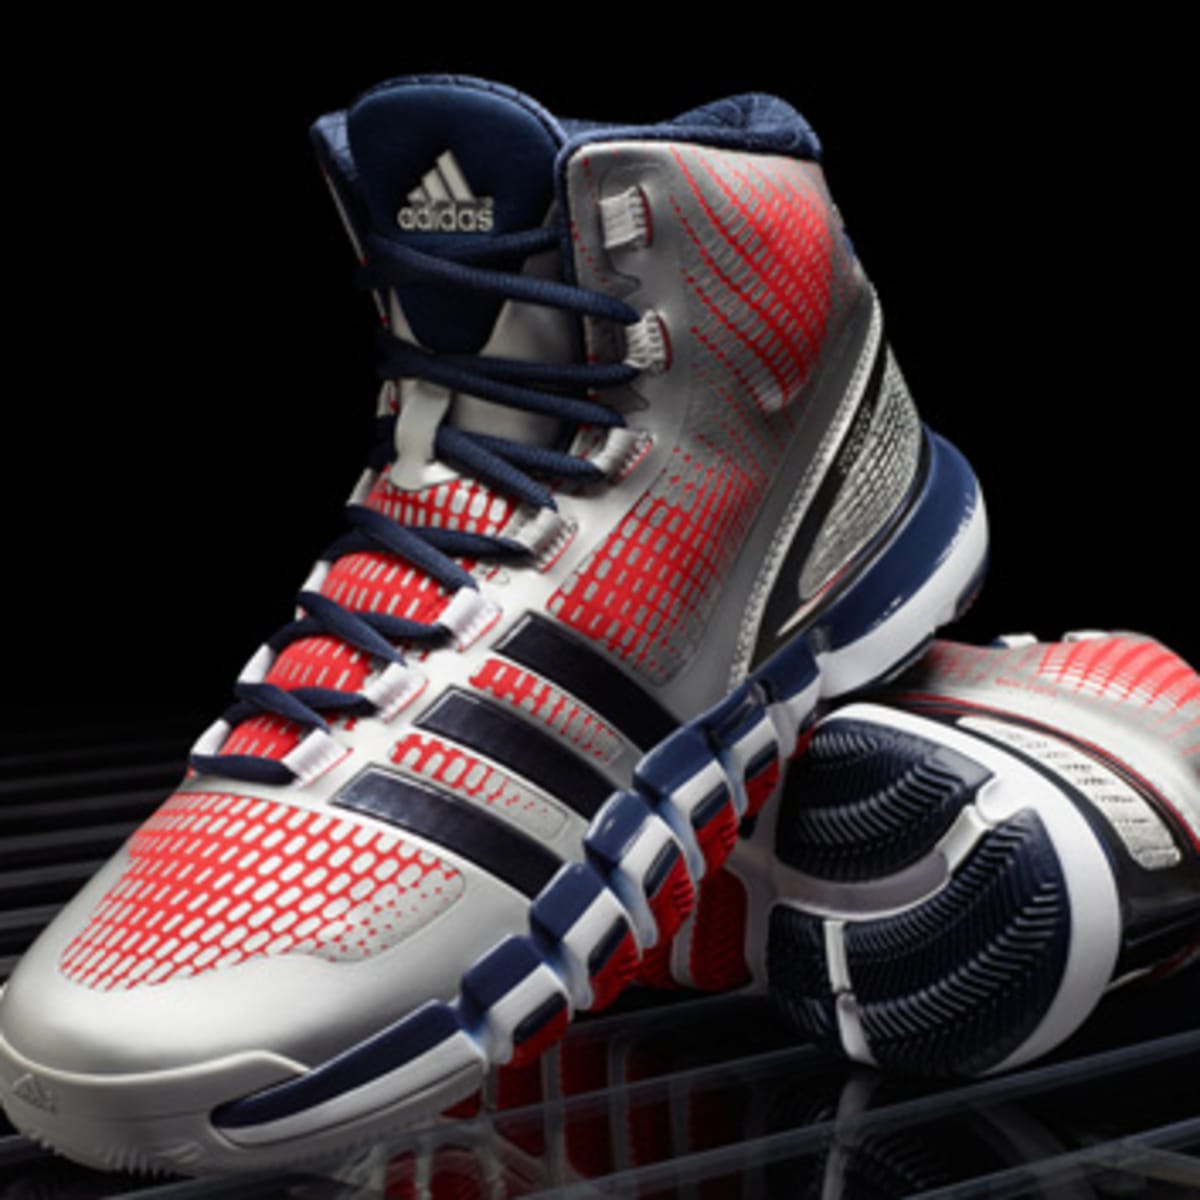 Adidas introduces basketball shoes Wall - Sports Illustrated